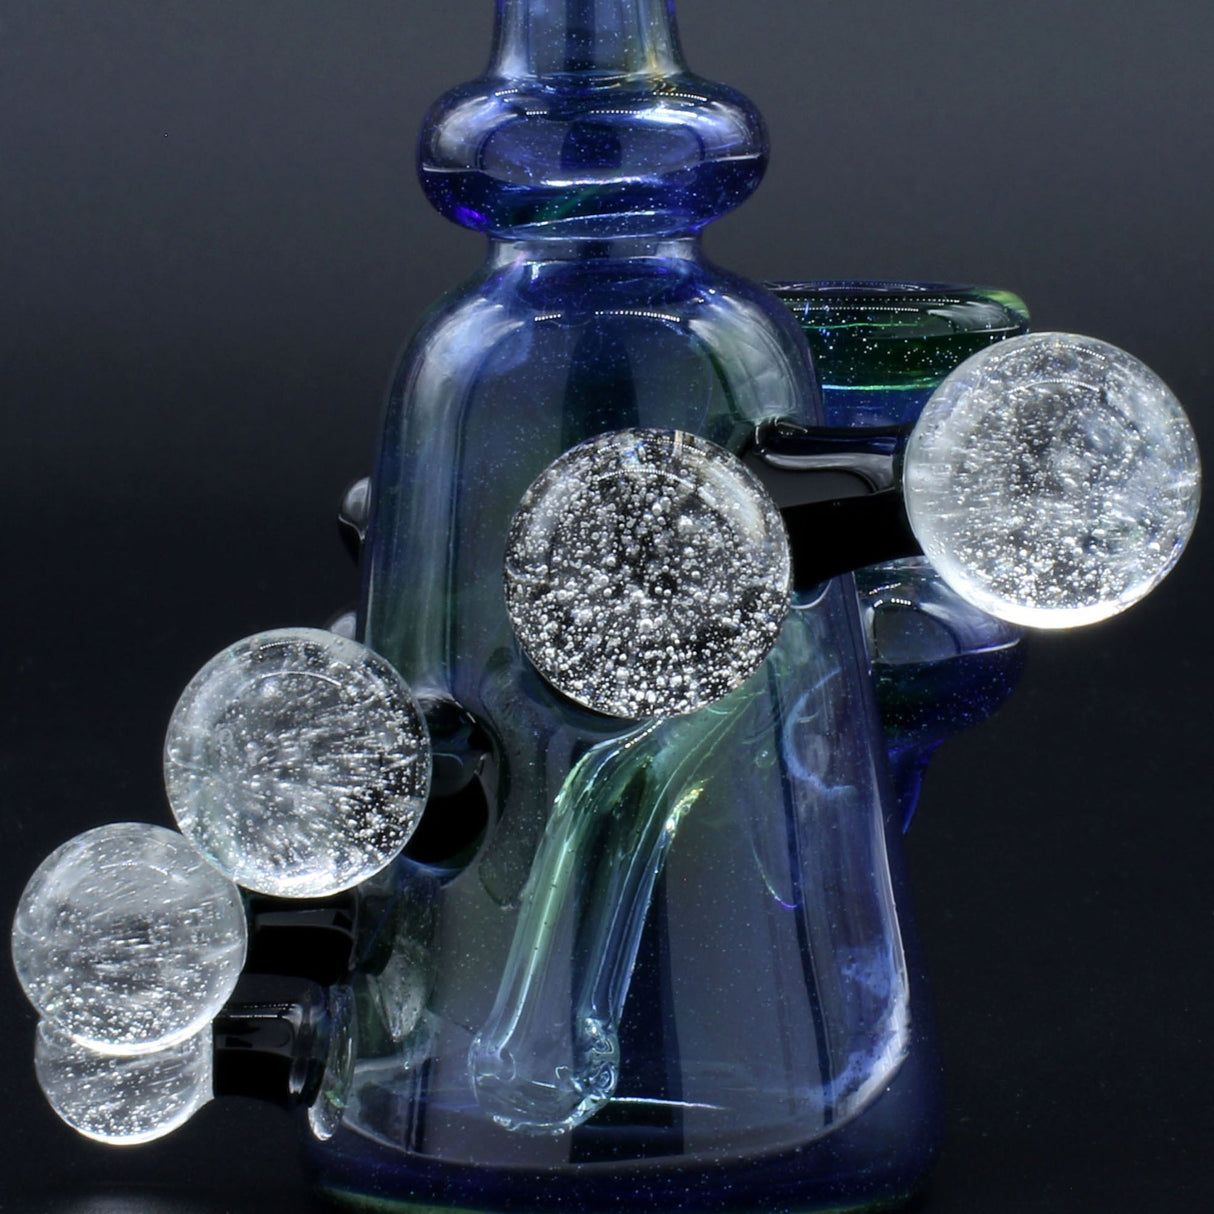 Clayball Glass "Super Nova" Heady Sherlock Dab Rig with intricate glasswork, 5.5" height, and 14mm joint